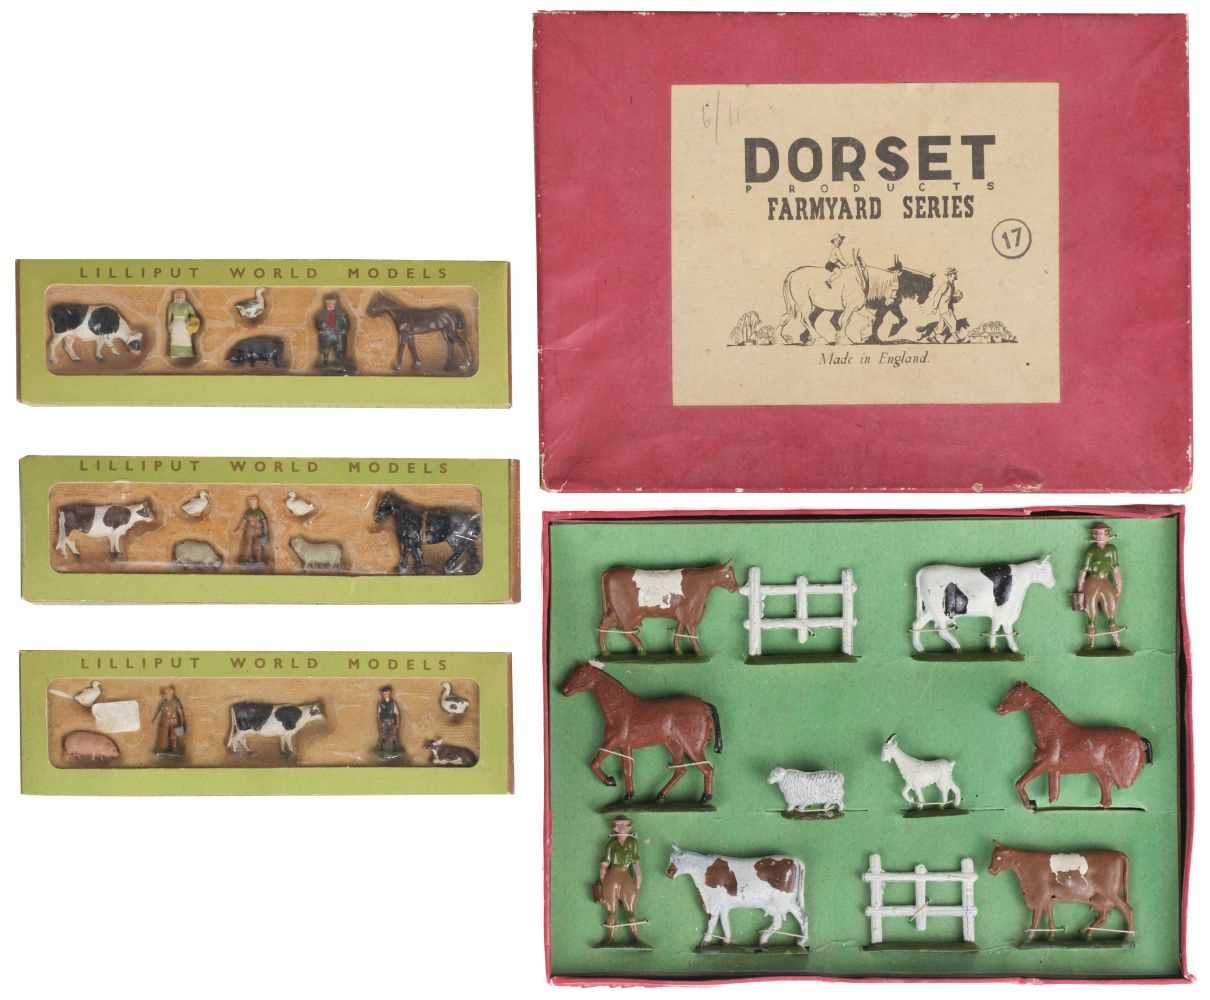 Lot 501 - Farm animals. A large quantity of early 20th century lead toy farm animals and farmyard items